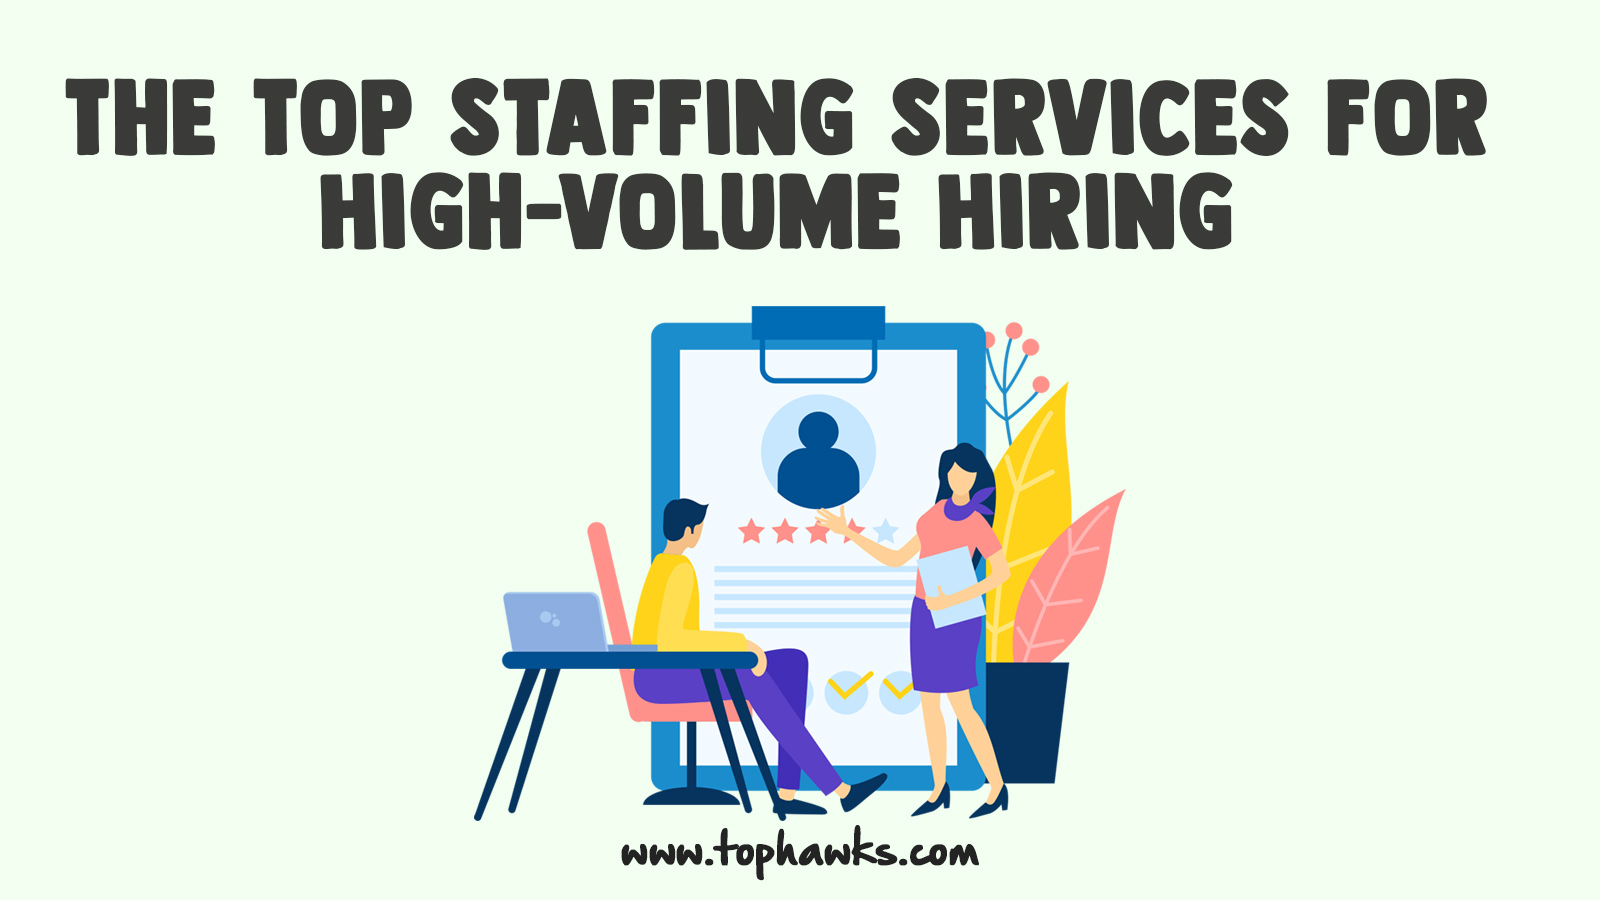 Image depicting The Top Staffing Services for High-Volume Hiring banner